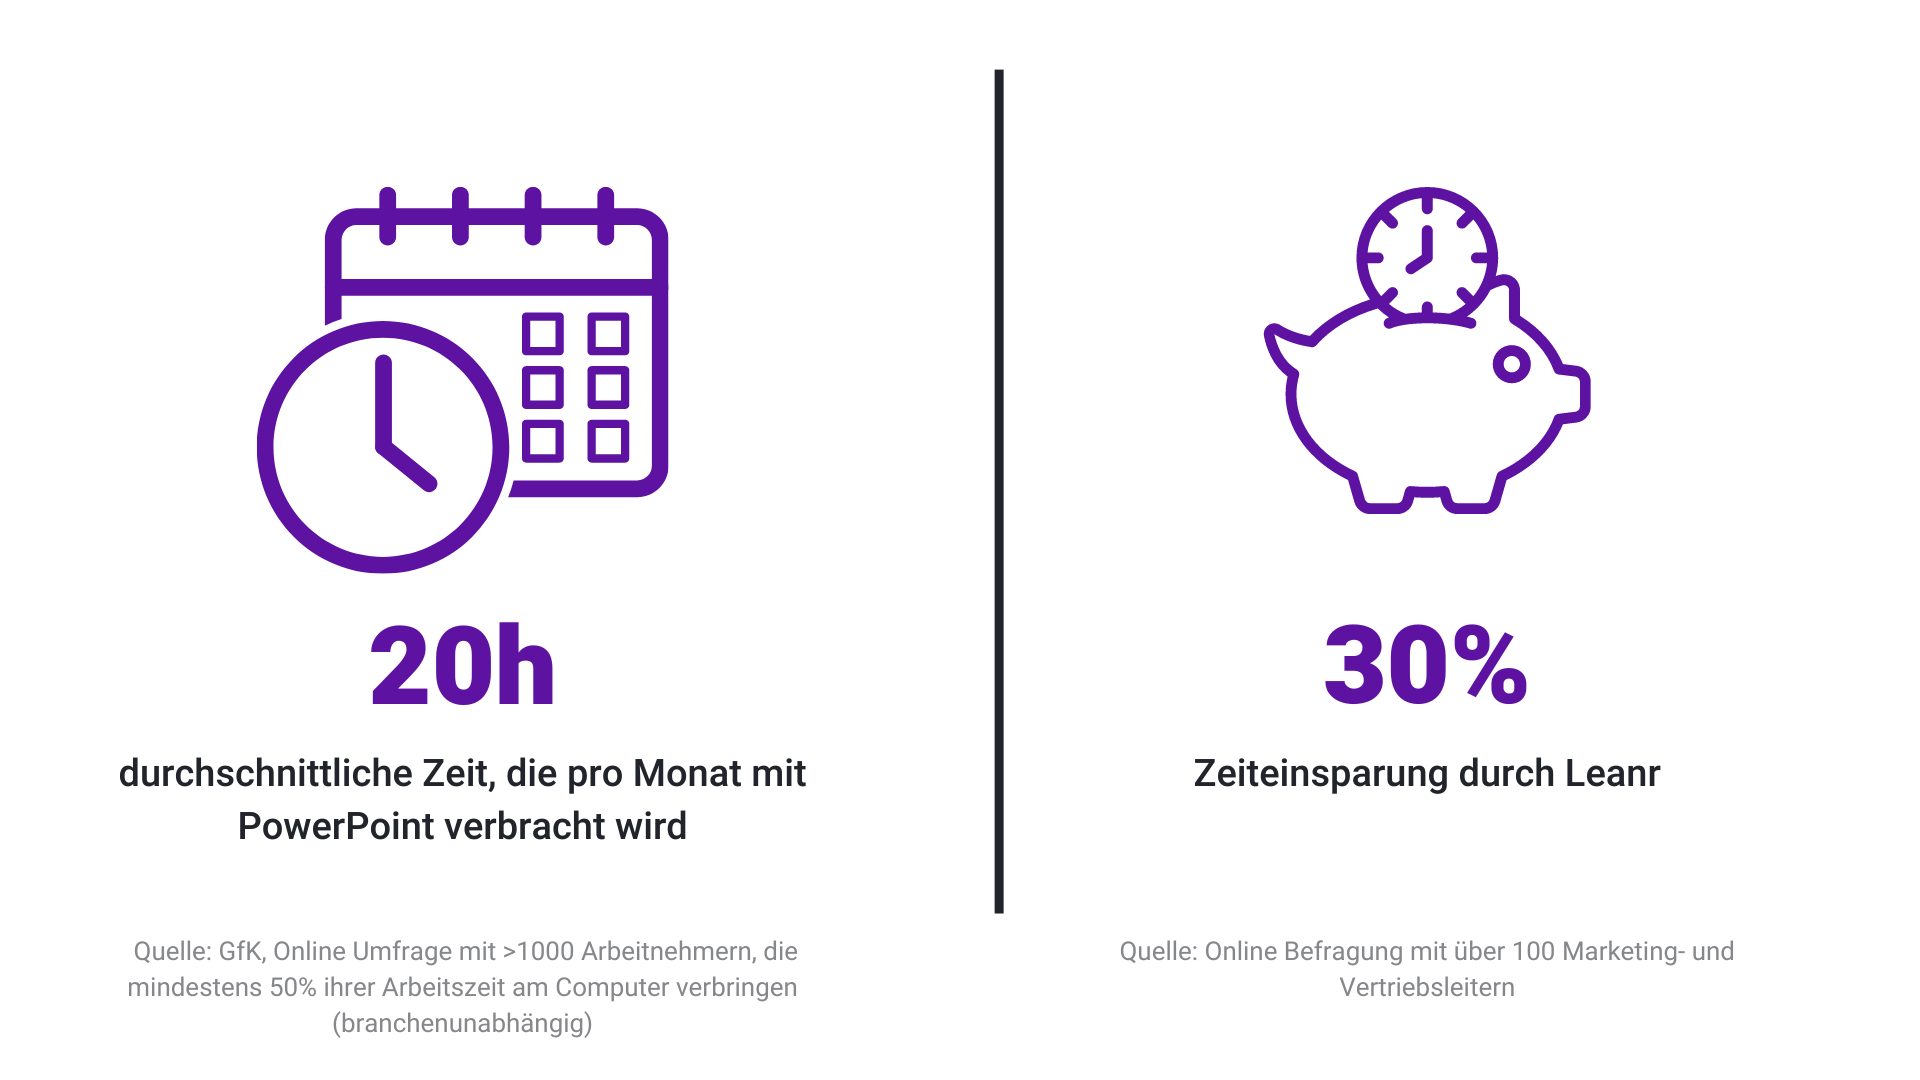 Two infographic icons: on the left, a calendar and clock with text "20h durchschnittliche zeit, die pro monat mit powerpoint verbracht wird", and on the right, a piggy bank with a clock and "30% zeiteinsparung durch learn".